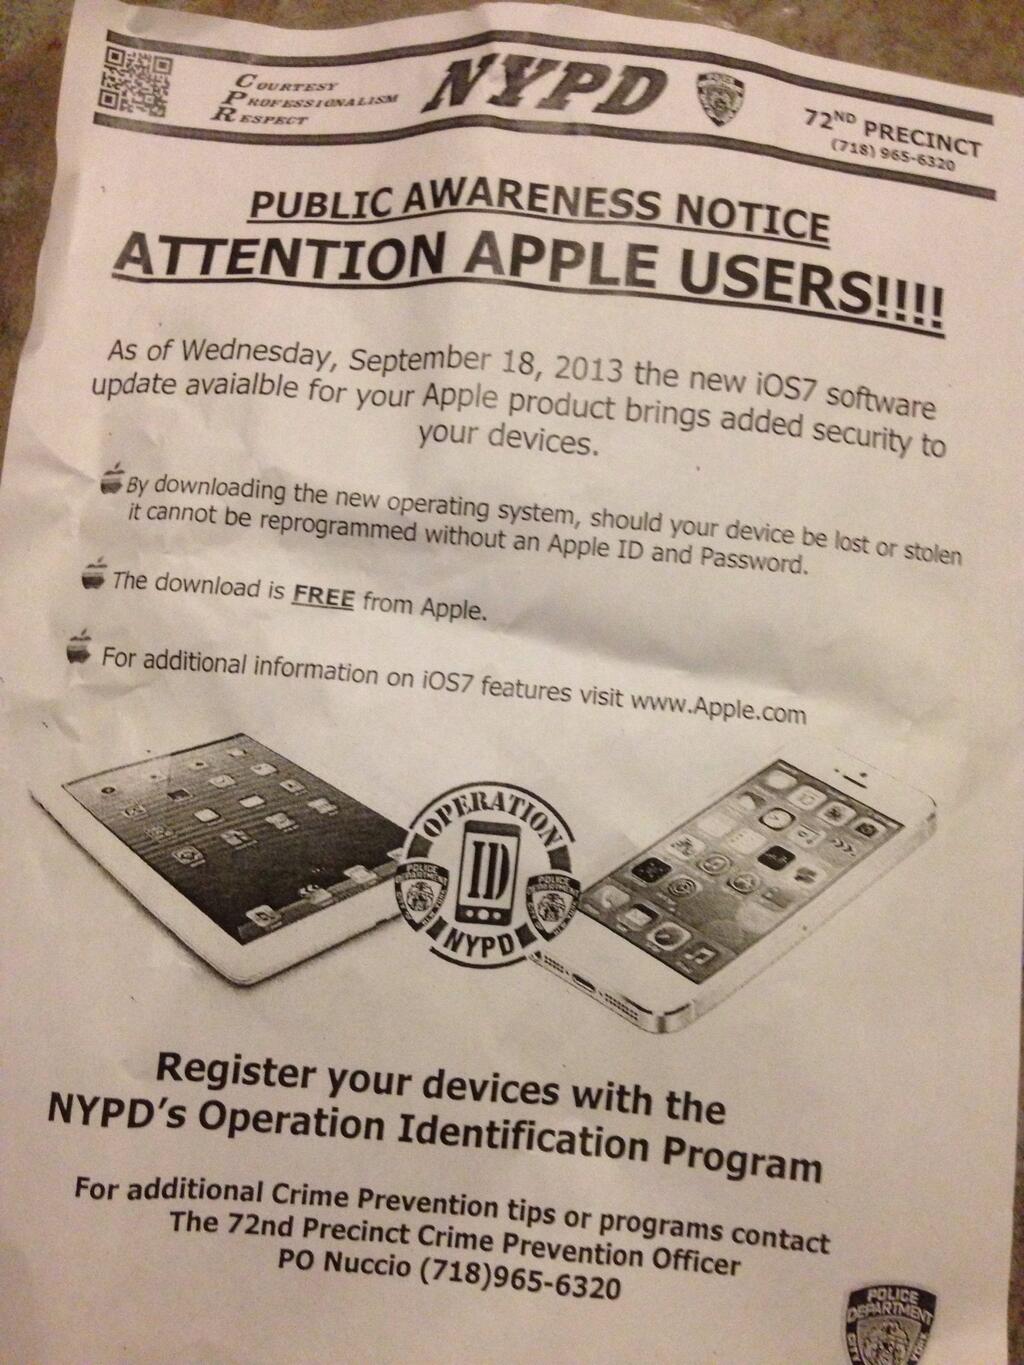 NYPD flyer advising an upgrade to iOS 7